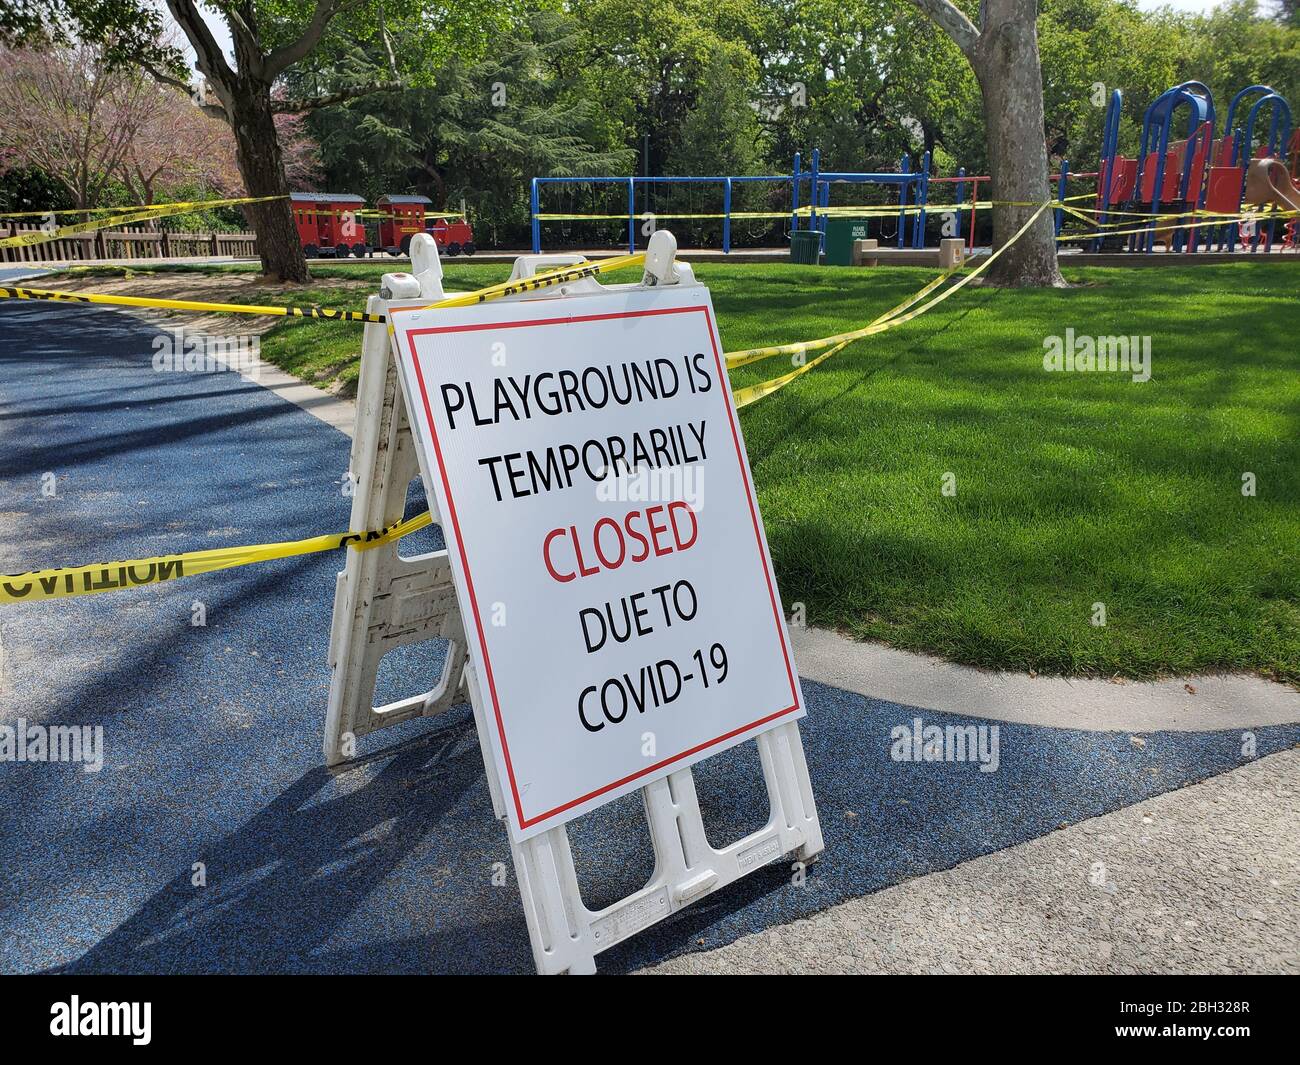 Caution tape and signs are visible at a closed playground during an outbreak of COVID-19 coronavirus in Walnut Creek, California, April 8, 2020. () Stock Photo